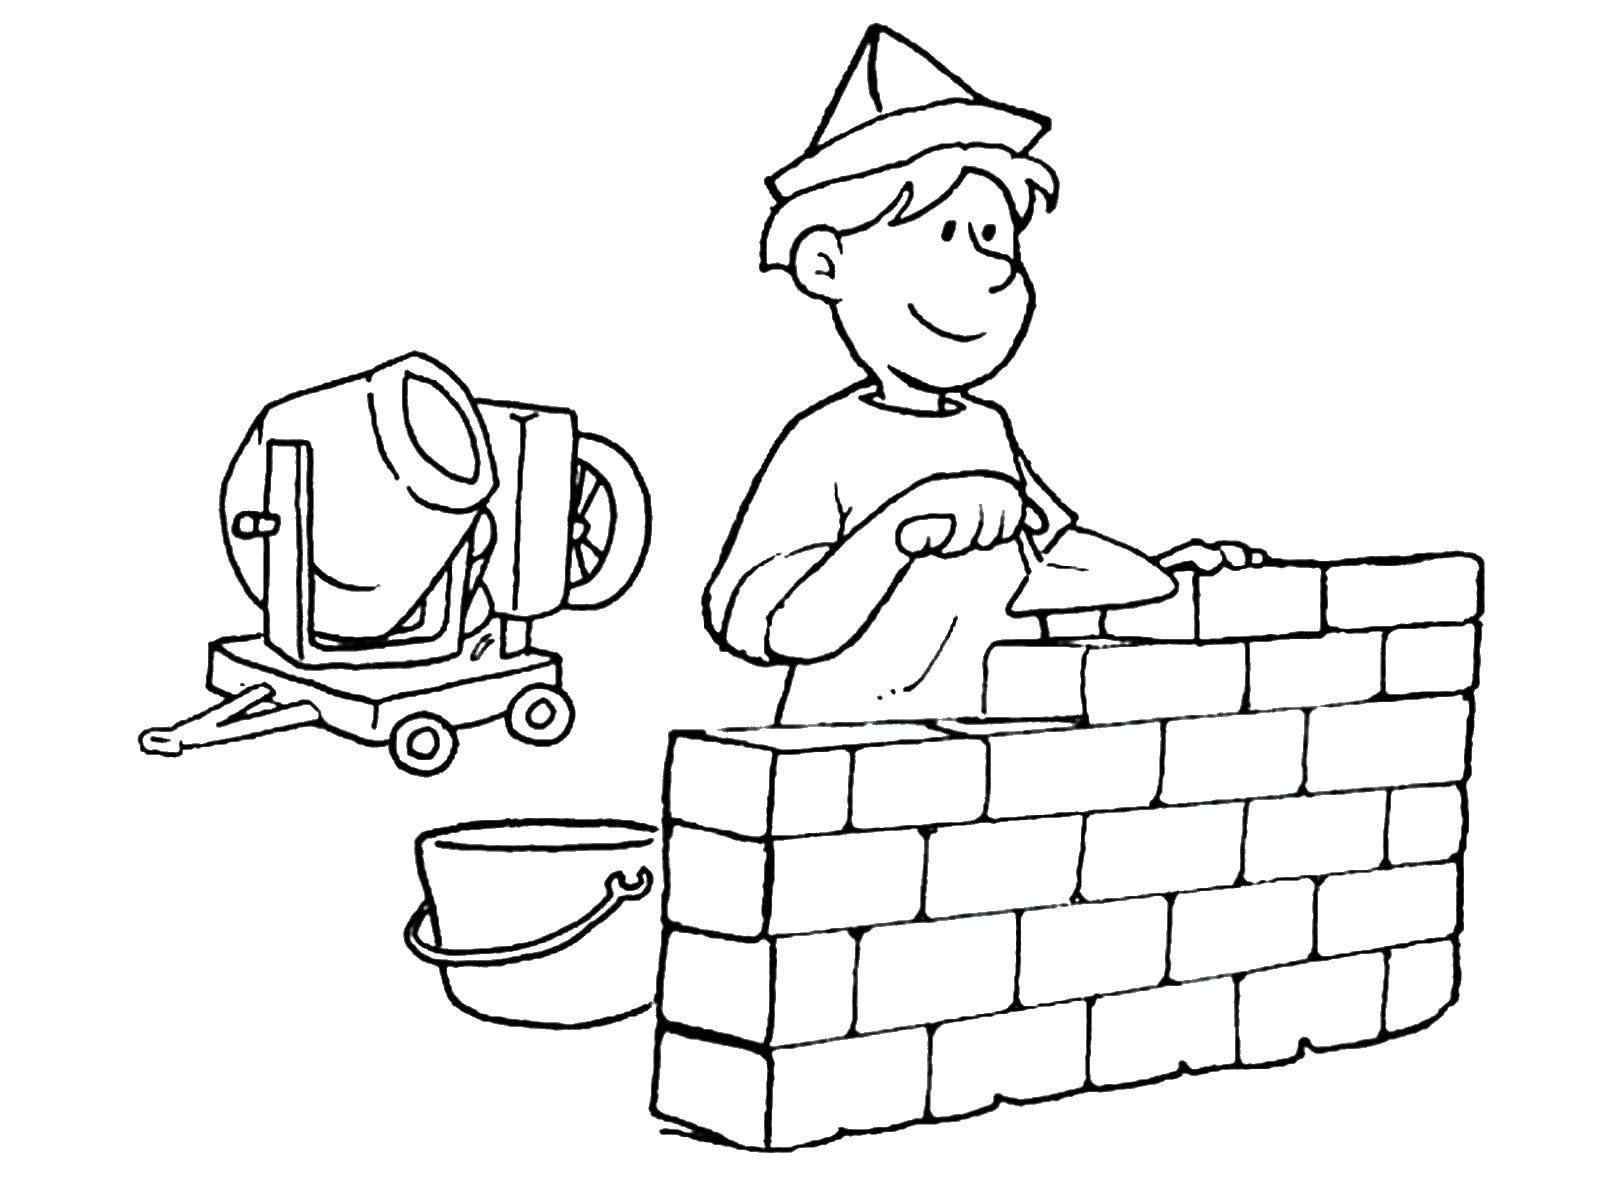 Coloring Builder lays bricks. Category a profession. Tags:  A profession.